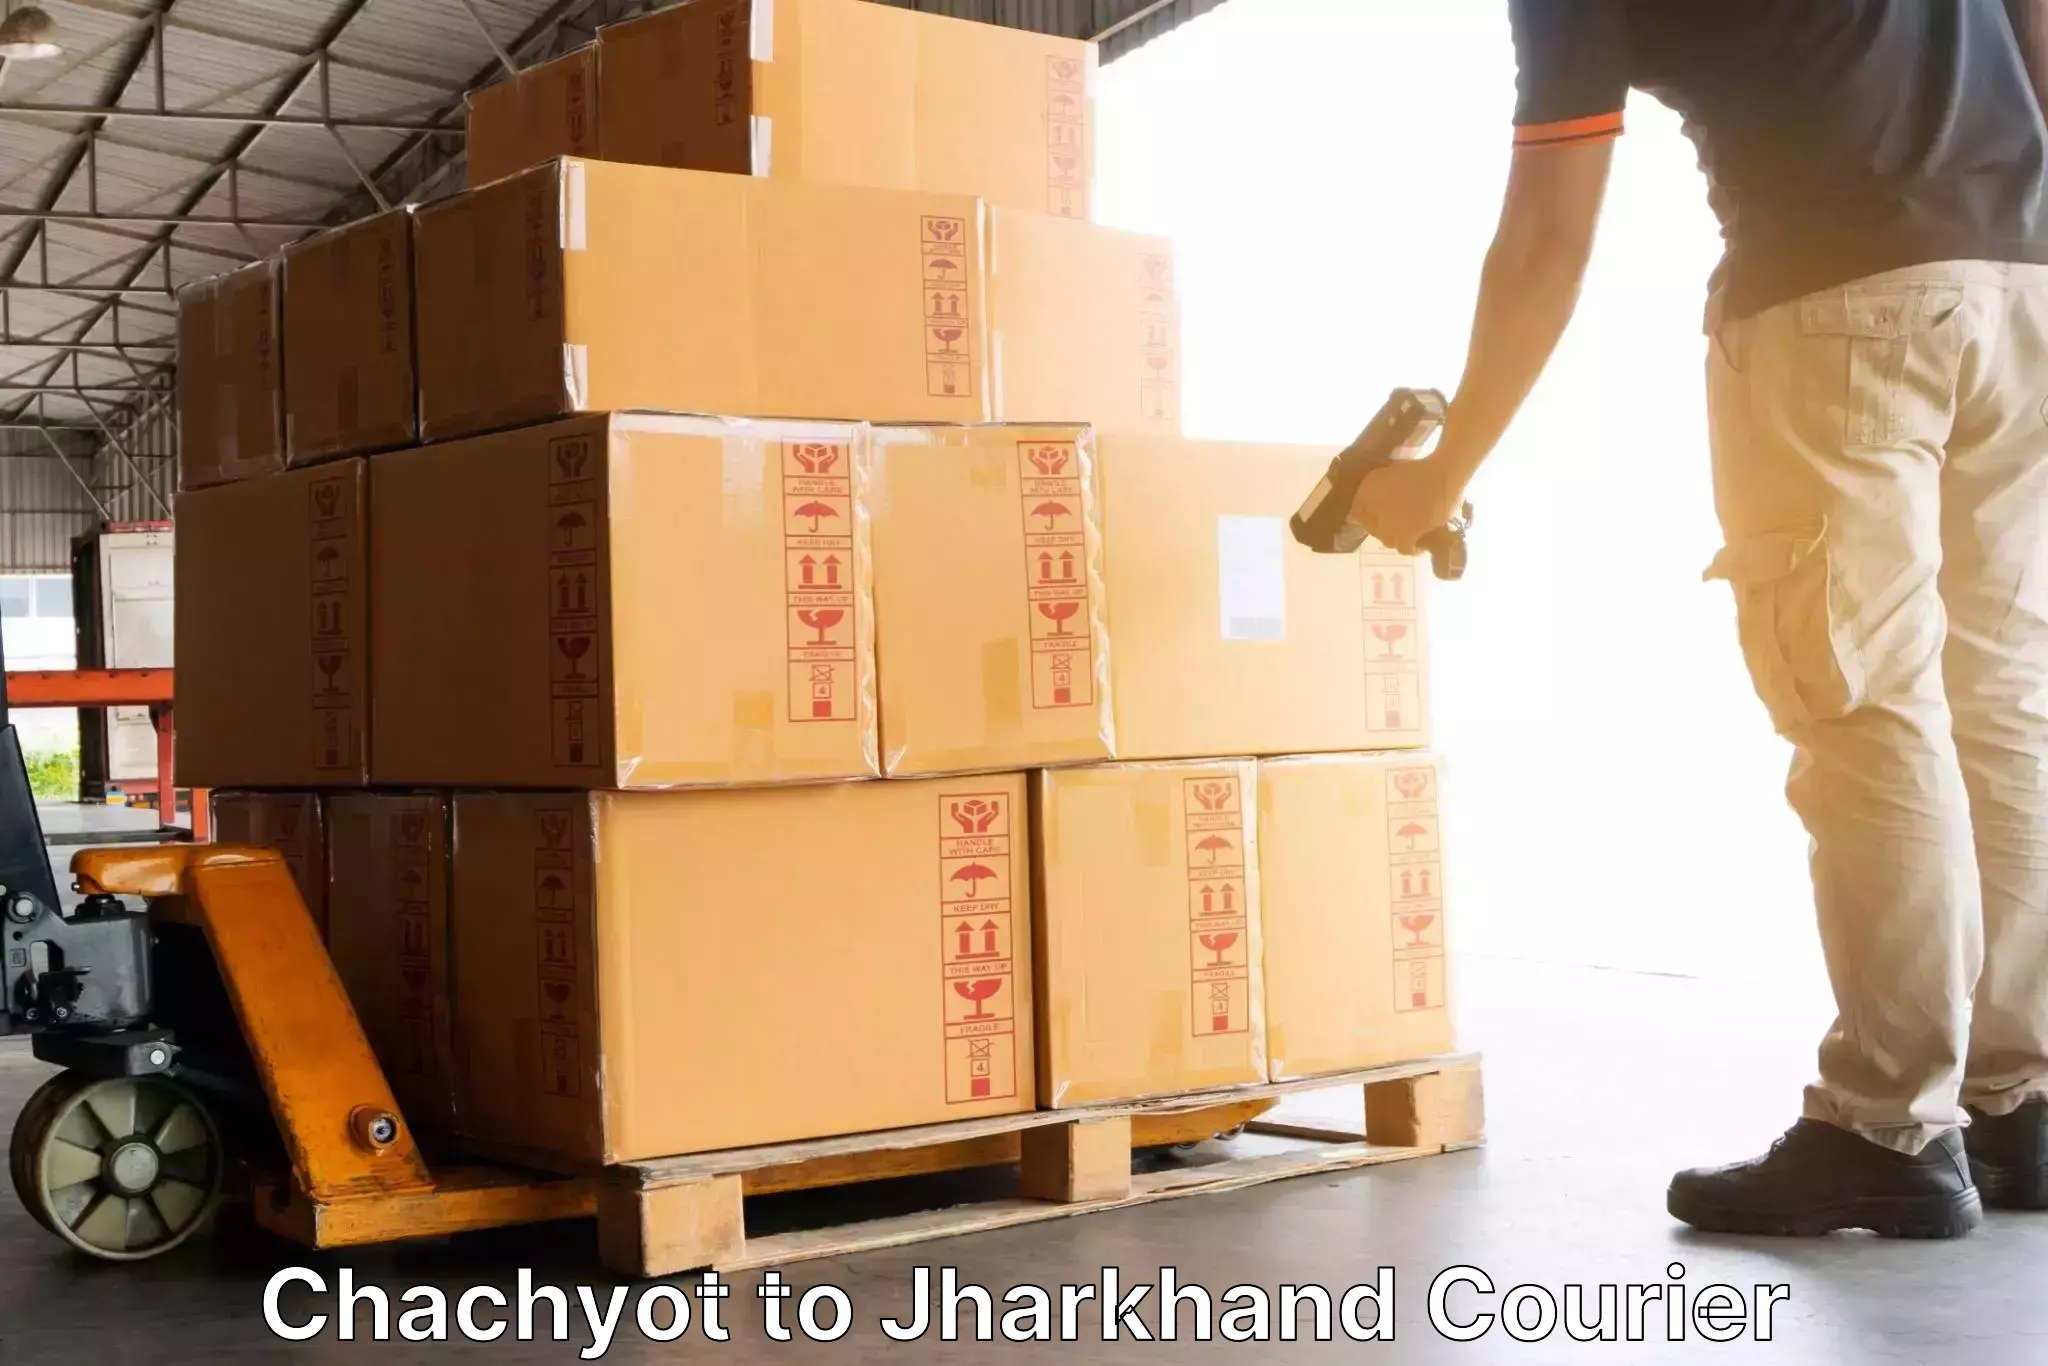 Supply chain delivery in Chachyot to Bokaro Steel City